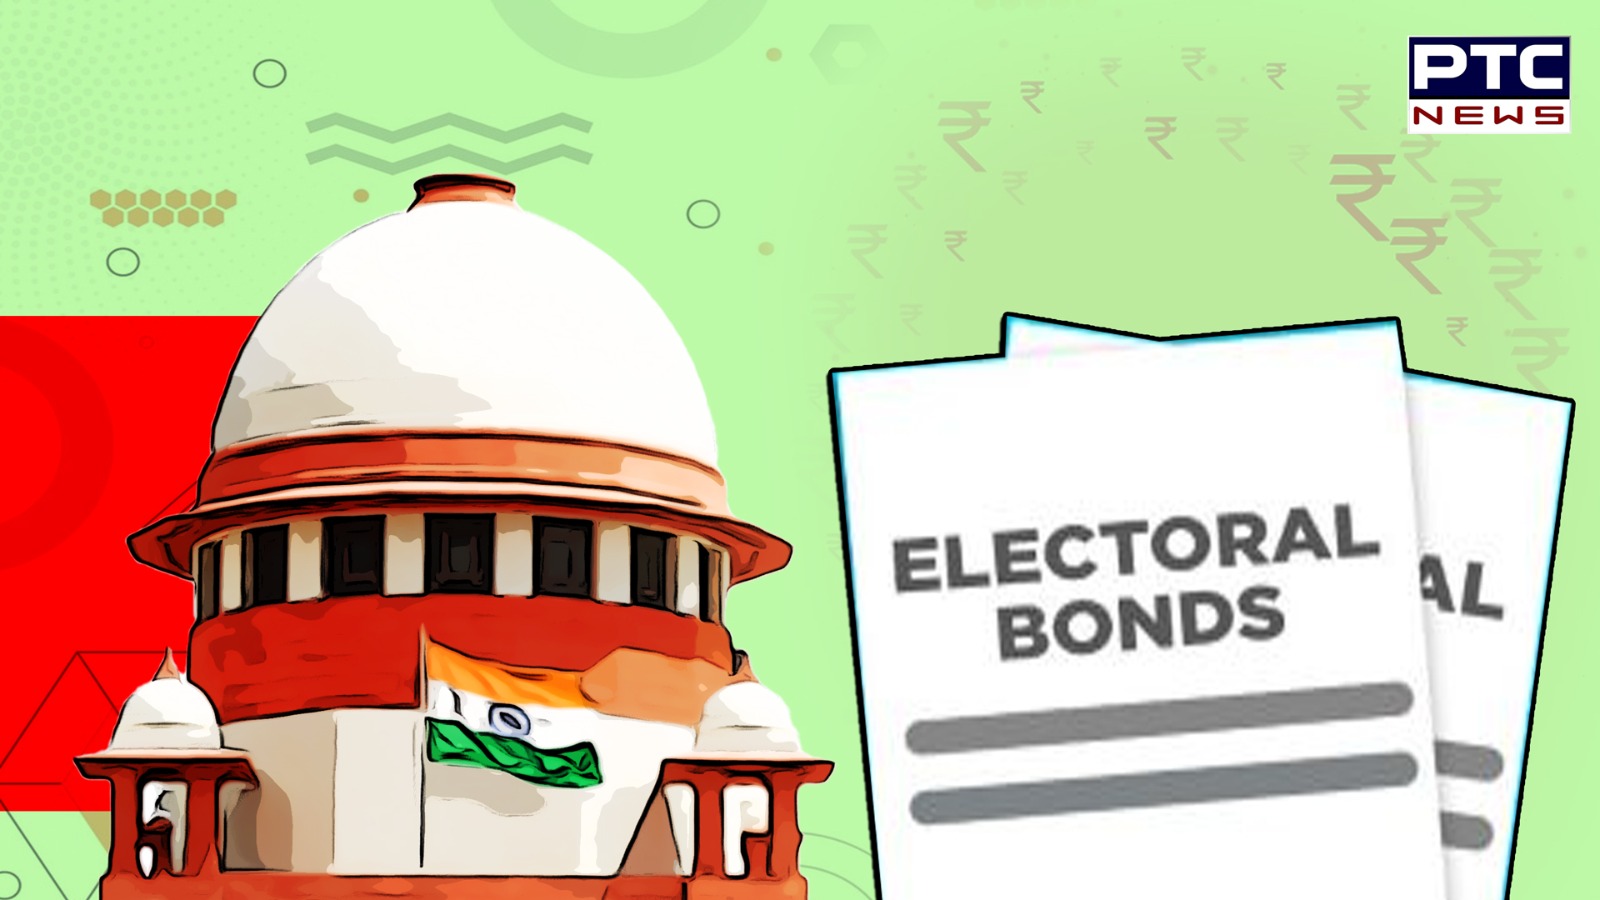 What are electoral bonds? Do they grant BJP an unfair advantage?